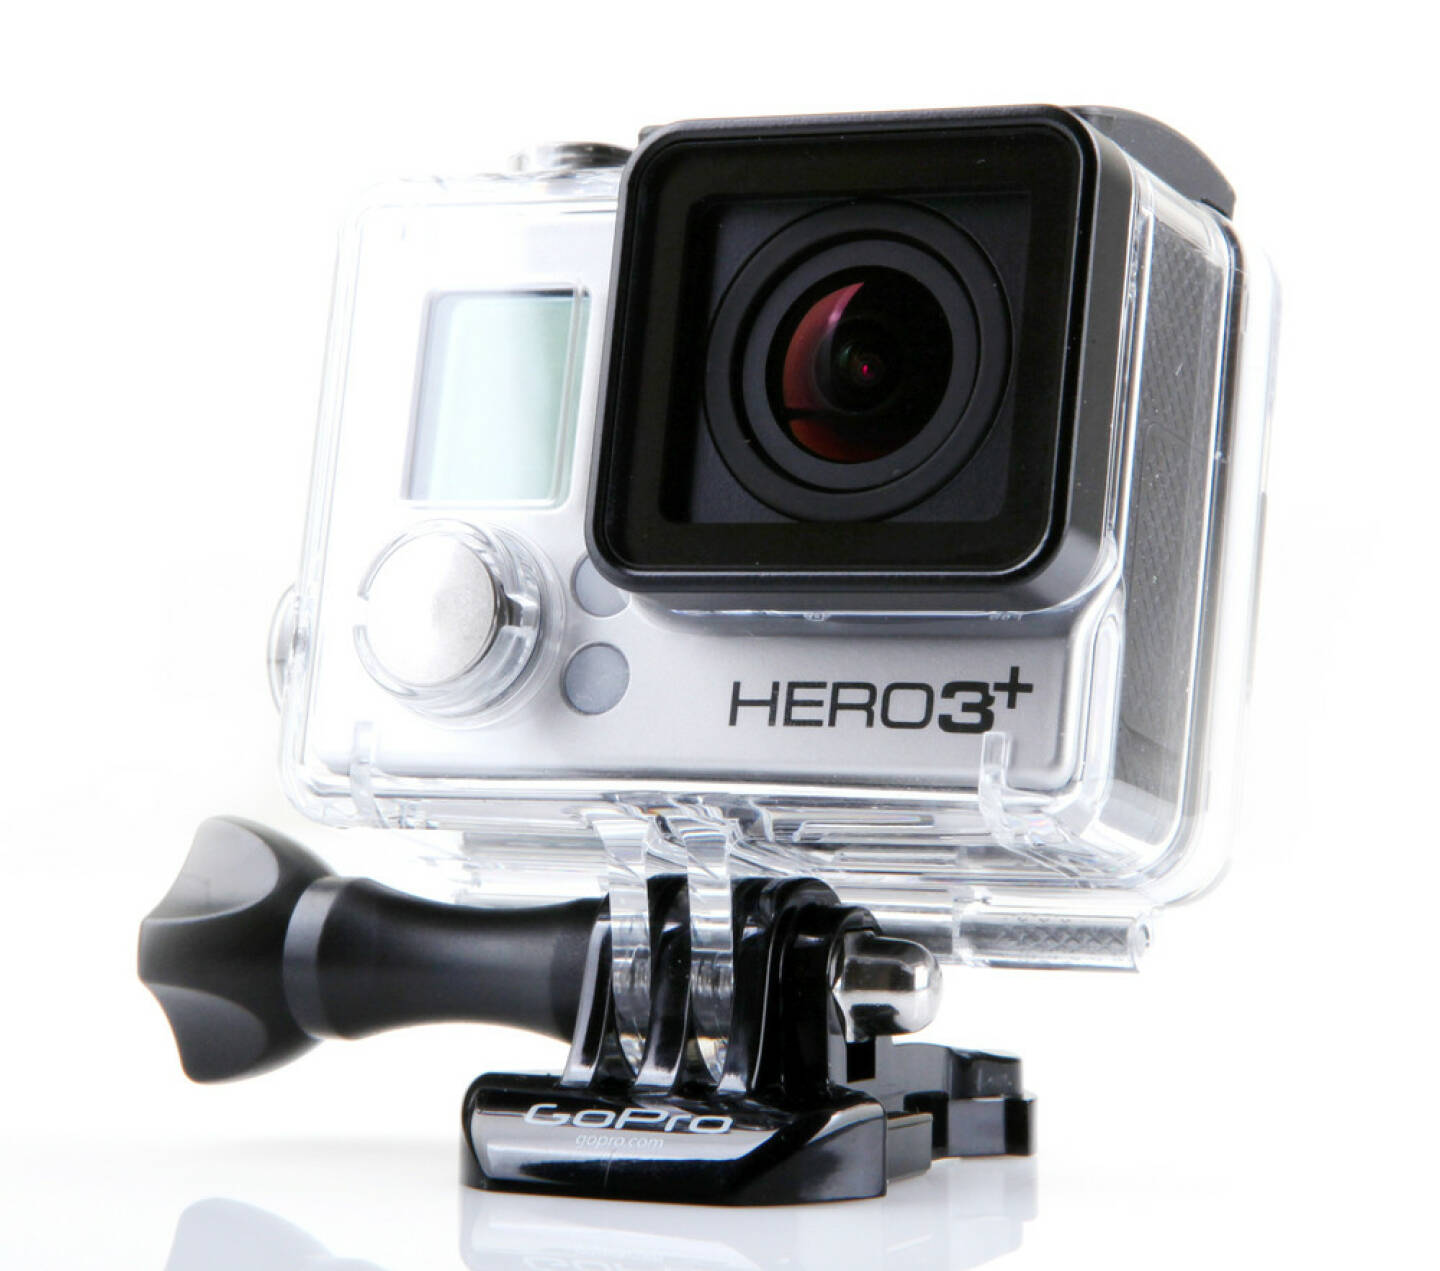 GoPro, <a href=http://www.shutterstock.com/gallery-635827p1.html?cr=00&pl=edit-00>Nenov Brothers Images</a> / <a href=http://www.shutterstock.com/?cr=00&pl=edit-00>Shutterstock.com</a> , Nenov Brothers Images / Shutterstock.com 